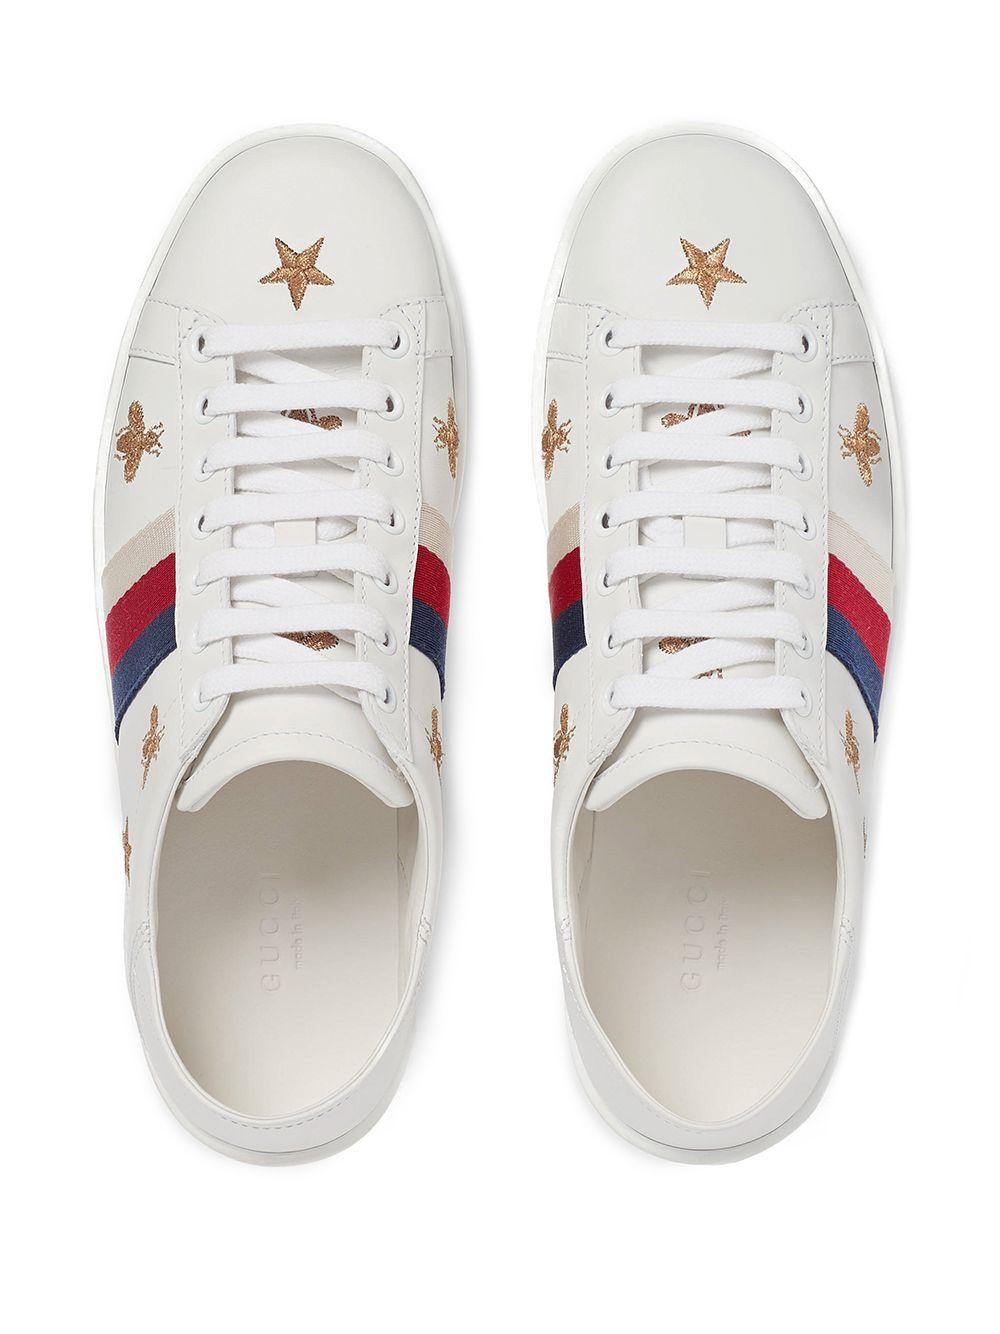 Gucci Women's New Ace Bee-embroidered Leather Trainers in White 